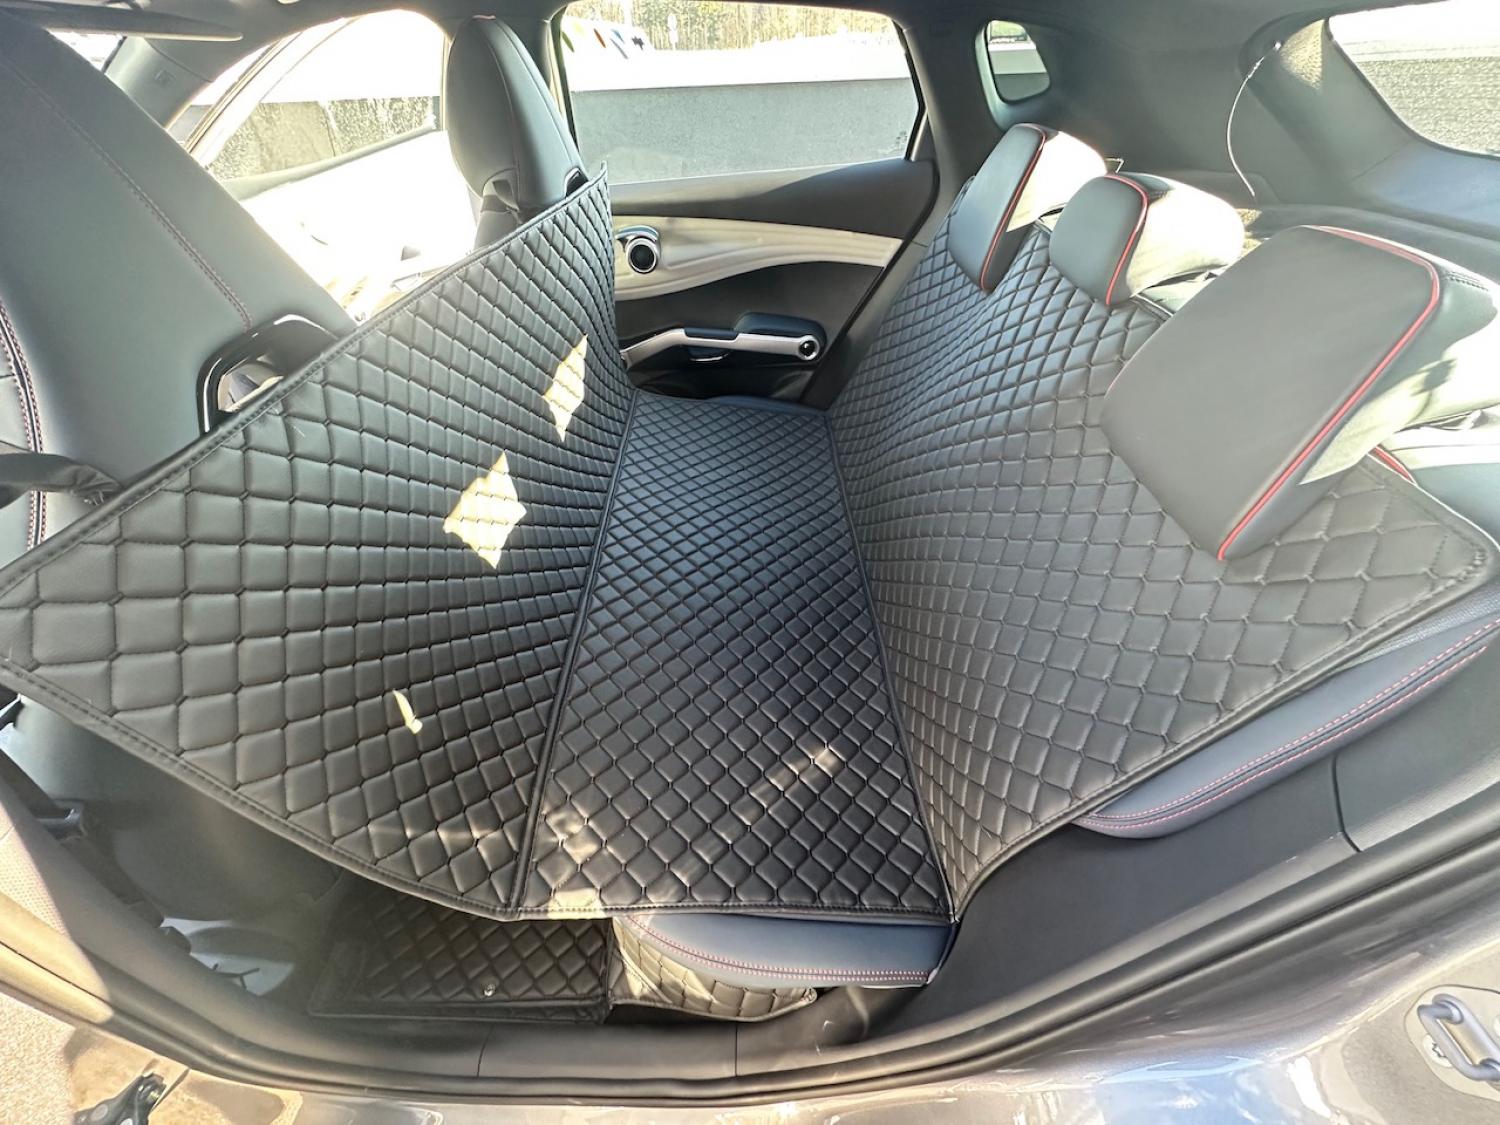 CARSTYLER® Back Seat Cover Geeignet Für Jeep Compass 2. Generation 2016-heute